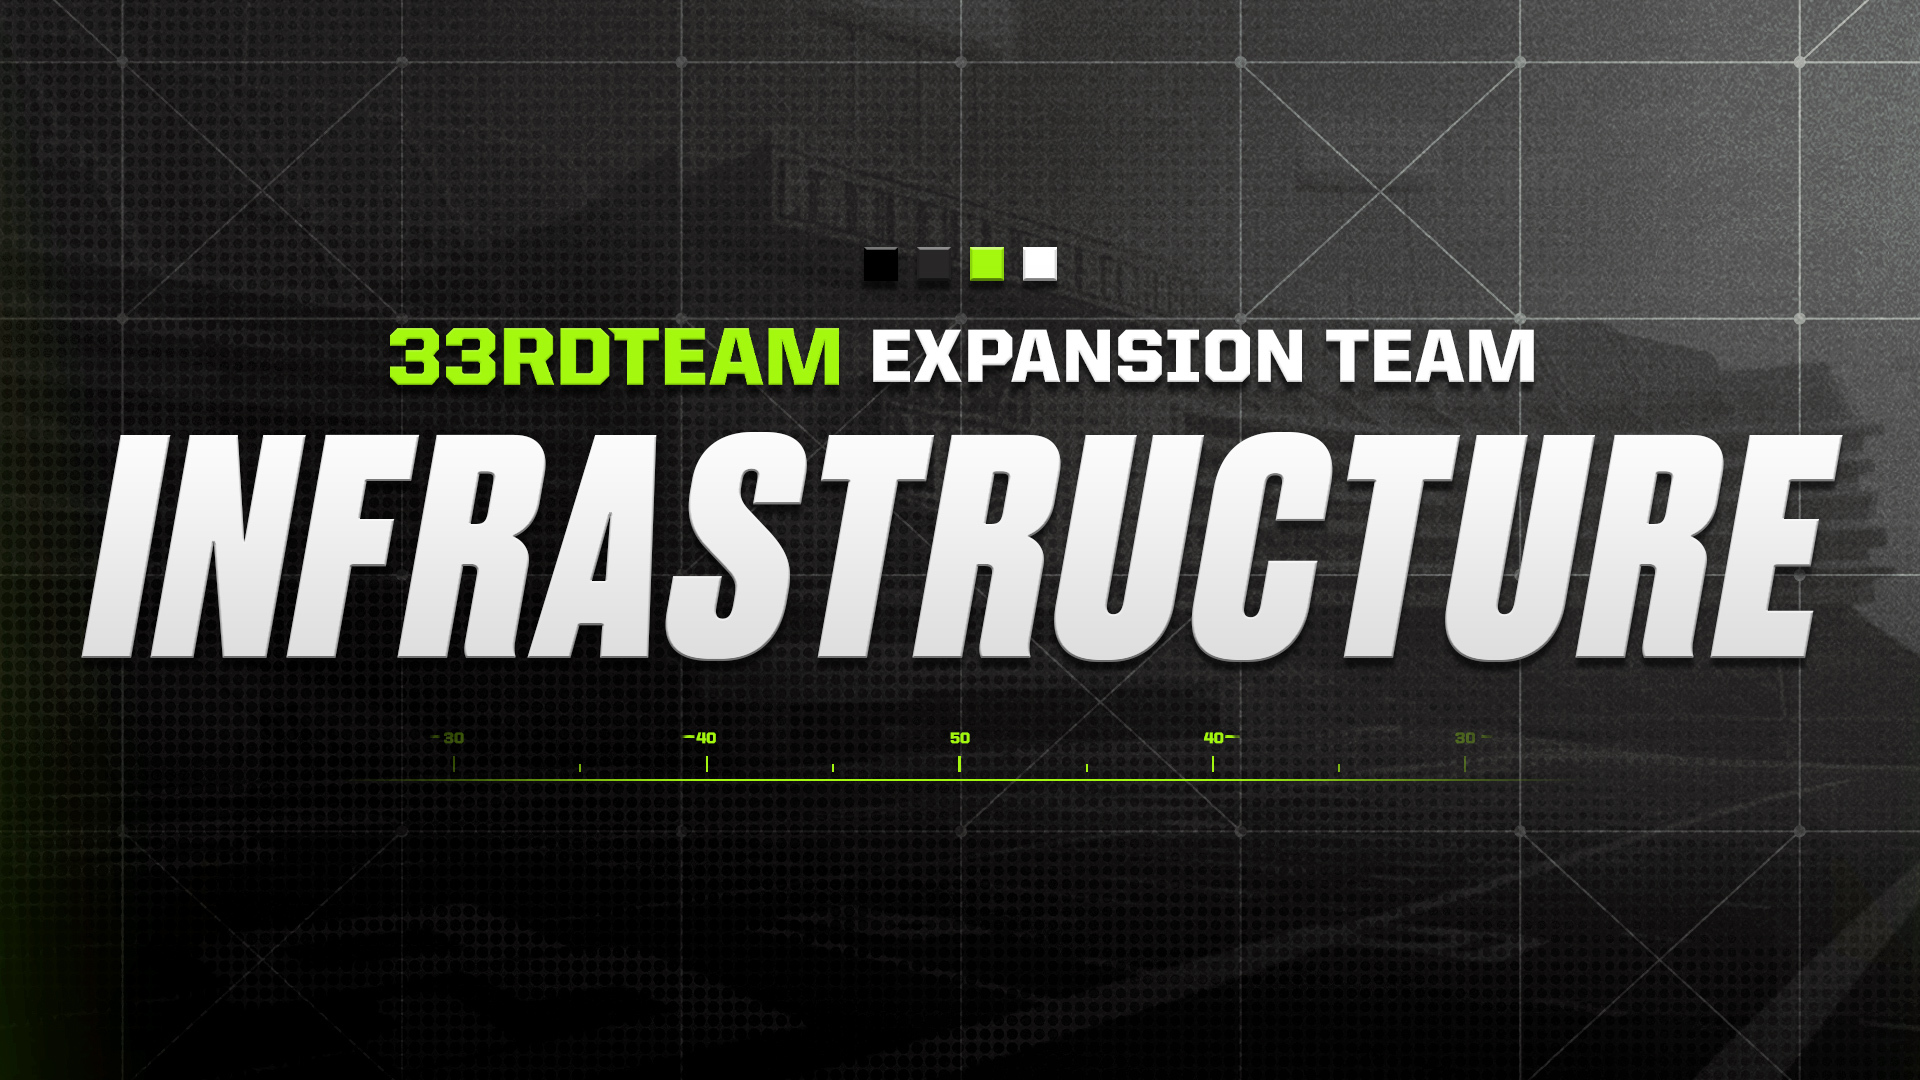 When Building an Expansion Team, Infrastructure is Paramount